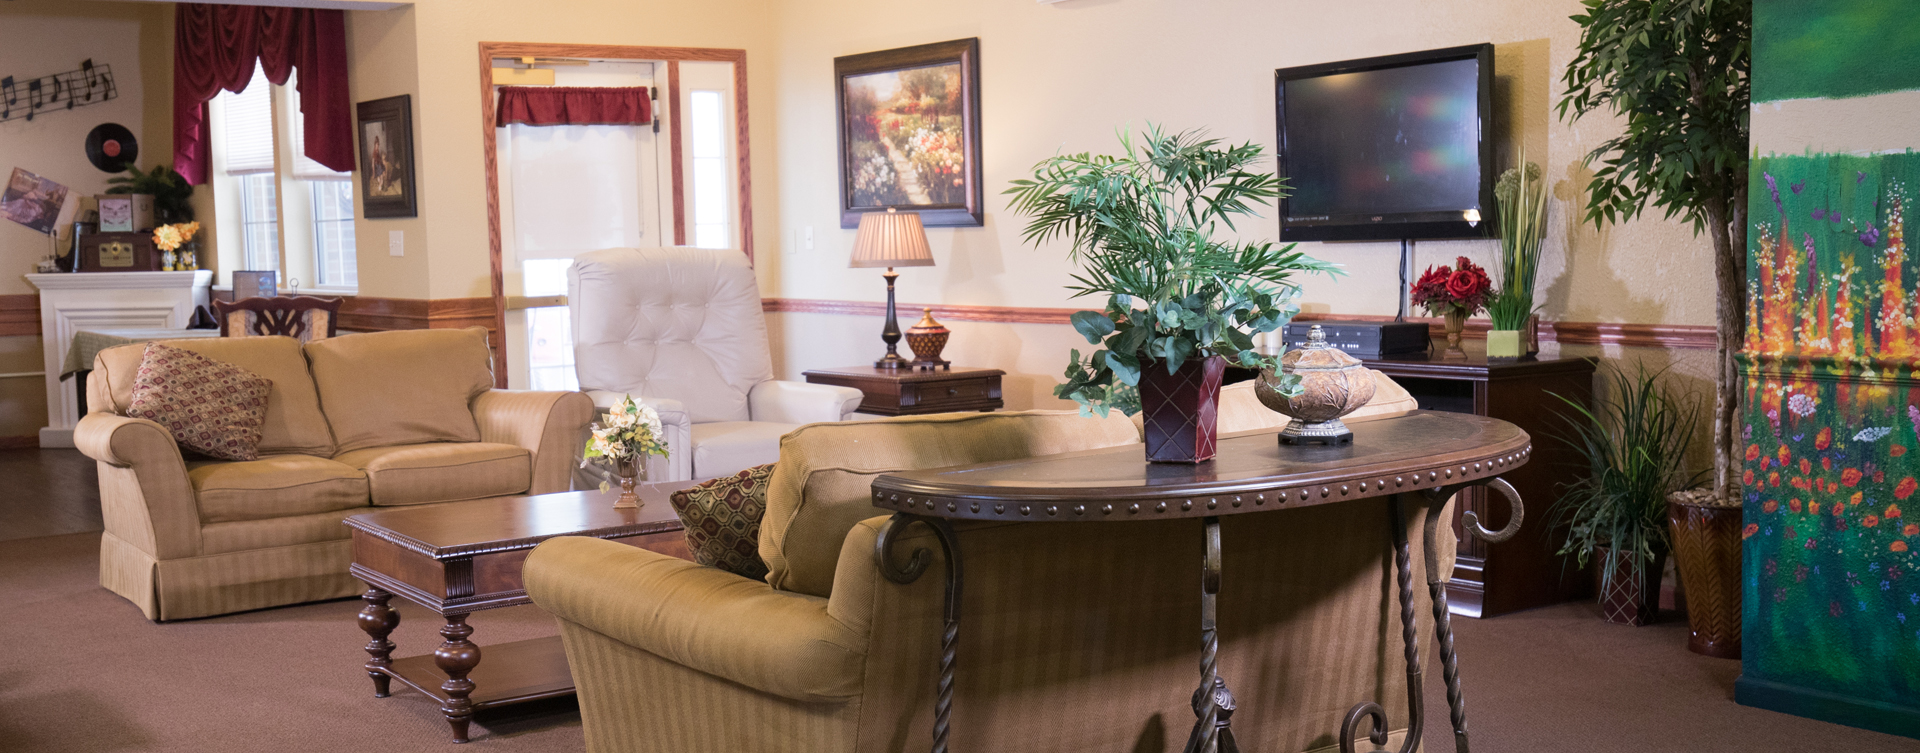 Residents can enjoy furniture covered in cozy fabrics in the Mary B’s living room at Bickford of Quincy